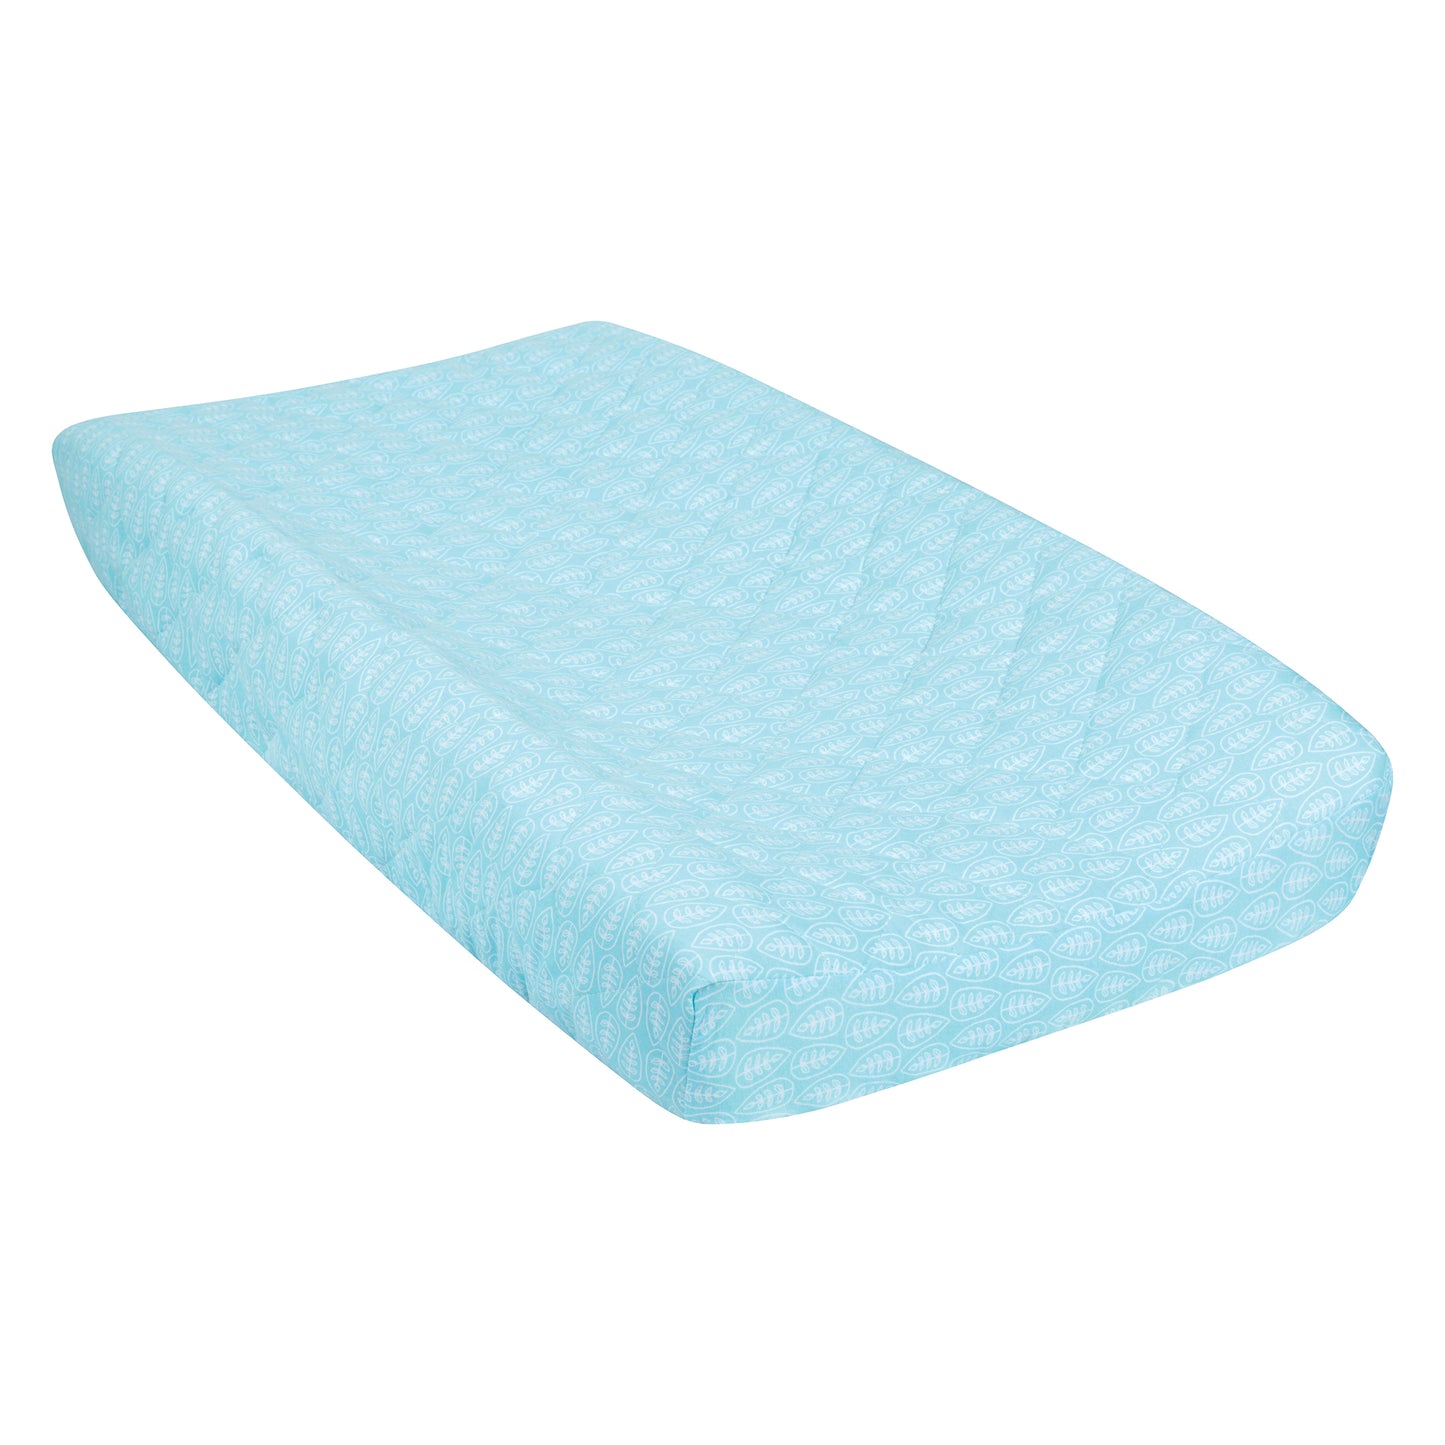 Leaves Quilted Jersey Changing Pad Cover103352$14.99Trend Lab